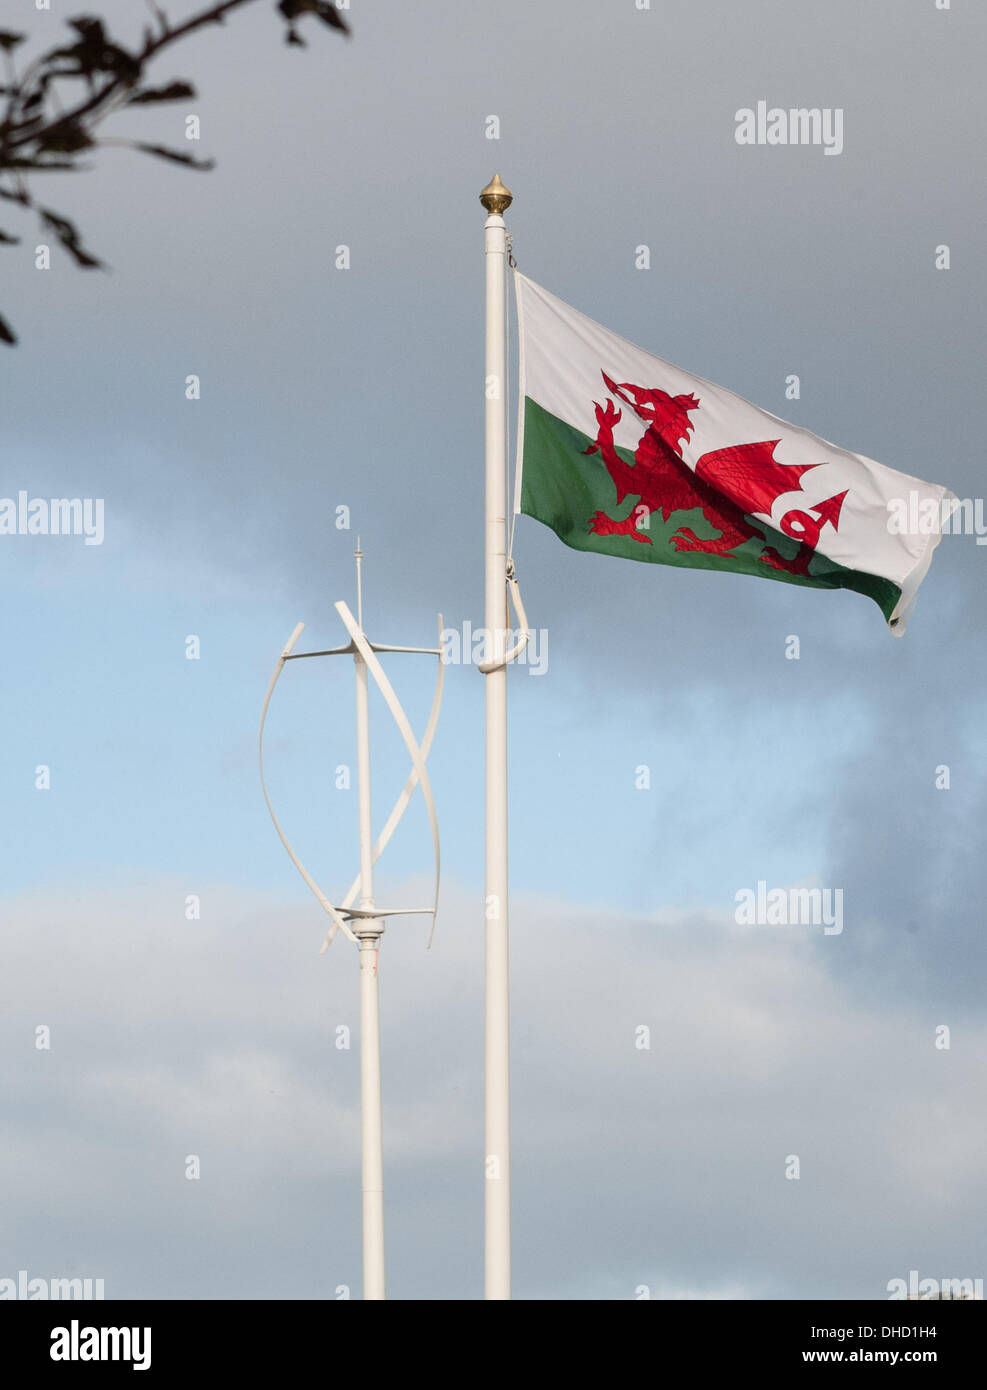 Aberystwyth, Wales, UK. 7th November 2013.   A Freedom of Information request to the Welsh Government has revealed that at £40,000 wind turbine located outset the governments regional offices in Aberystwyth produces only £5.28 of electricity per month.  Before it was installed, the turbine makers warned Welsh government contractors it would not be exposed to enough wind where it was to be placed.   Credit:  keith morris/Alamy Live News Stock Photo